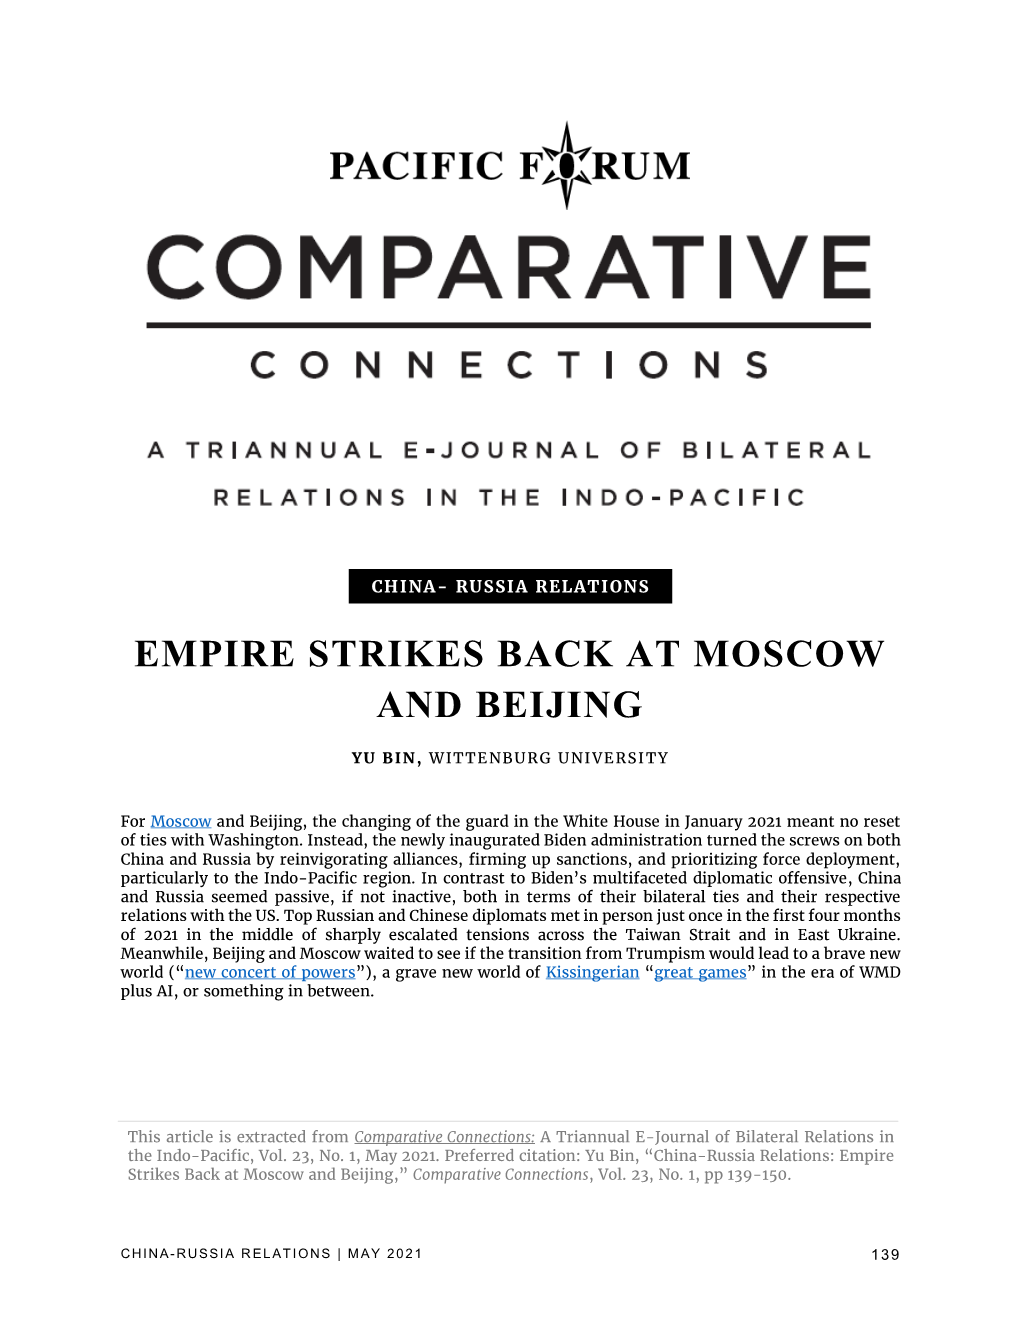 Empire Strikes Back at Moscow and Beijing